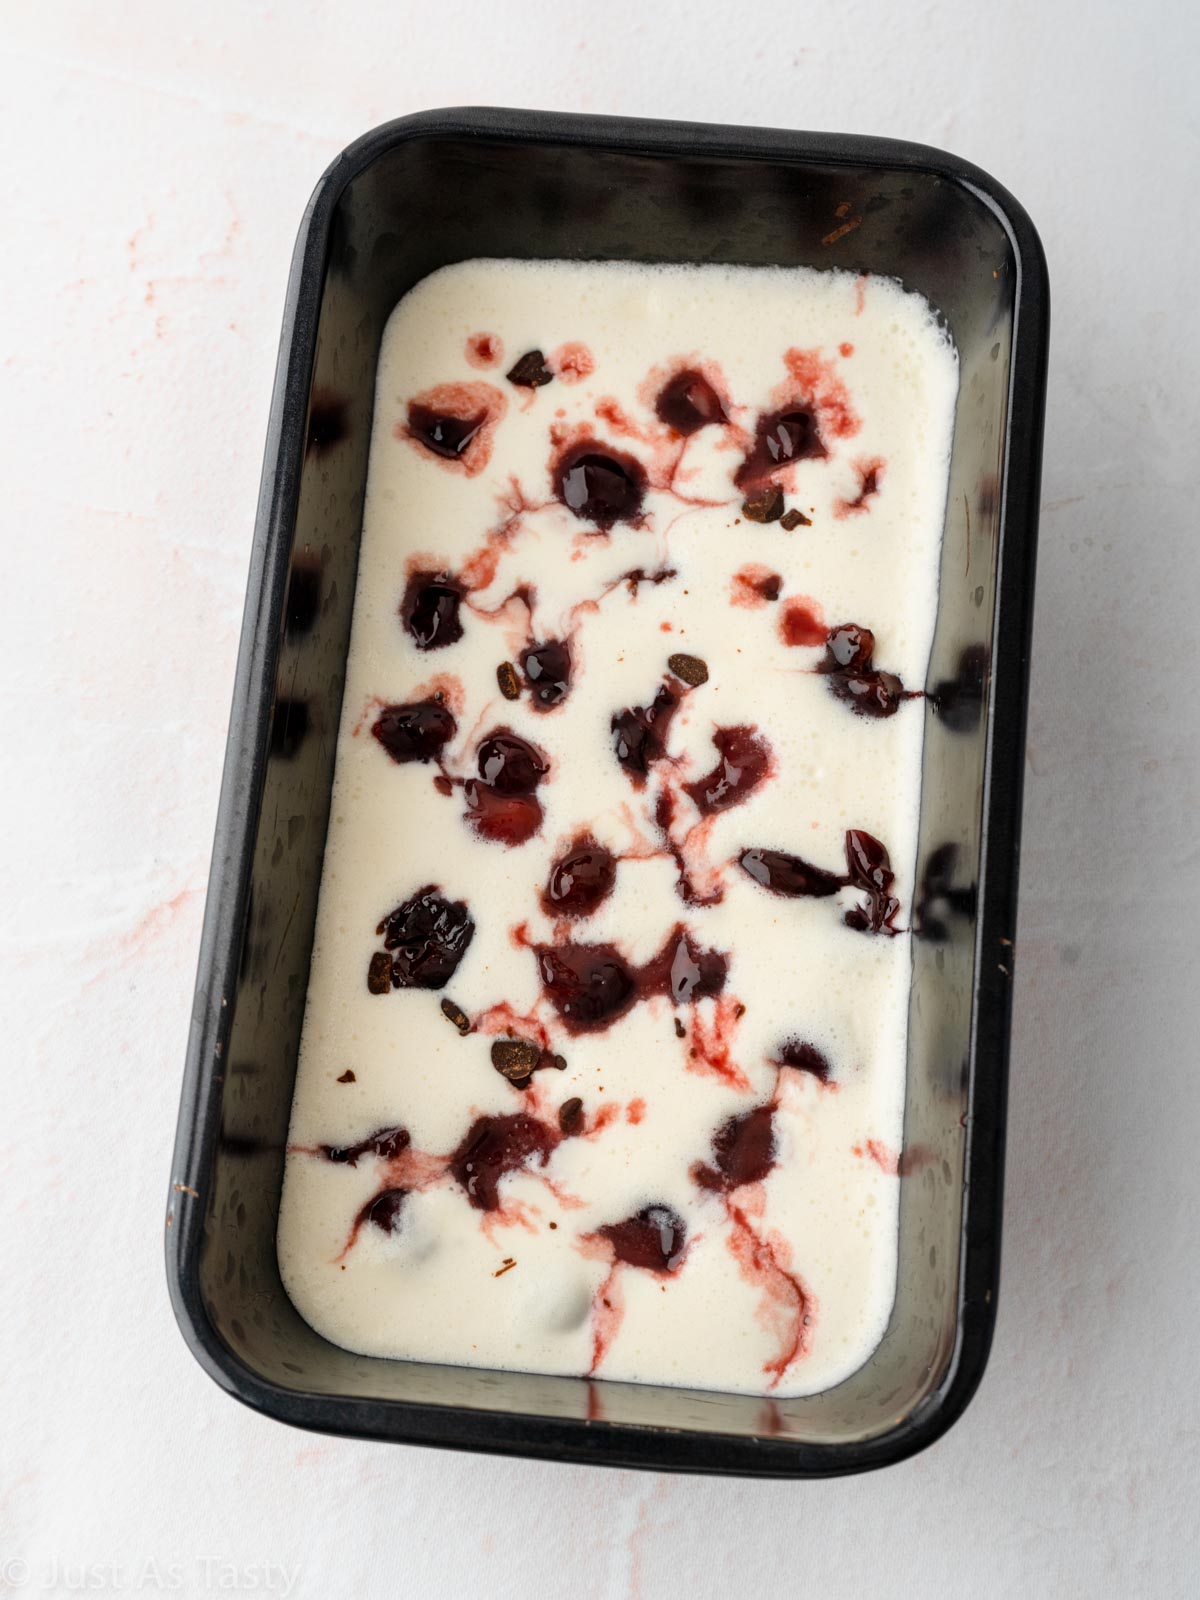 Black forest ice cream in loaf pan before freezing.